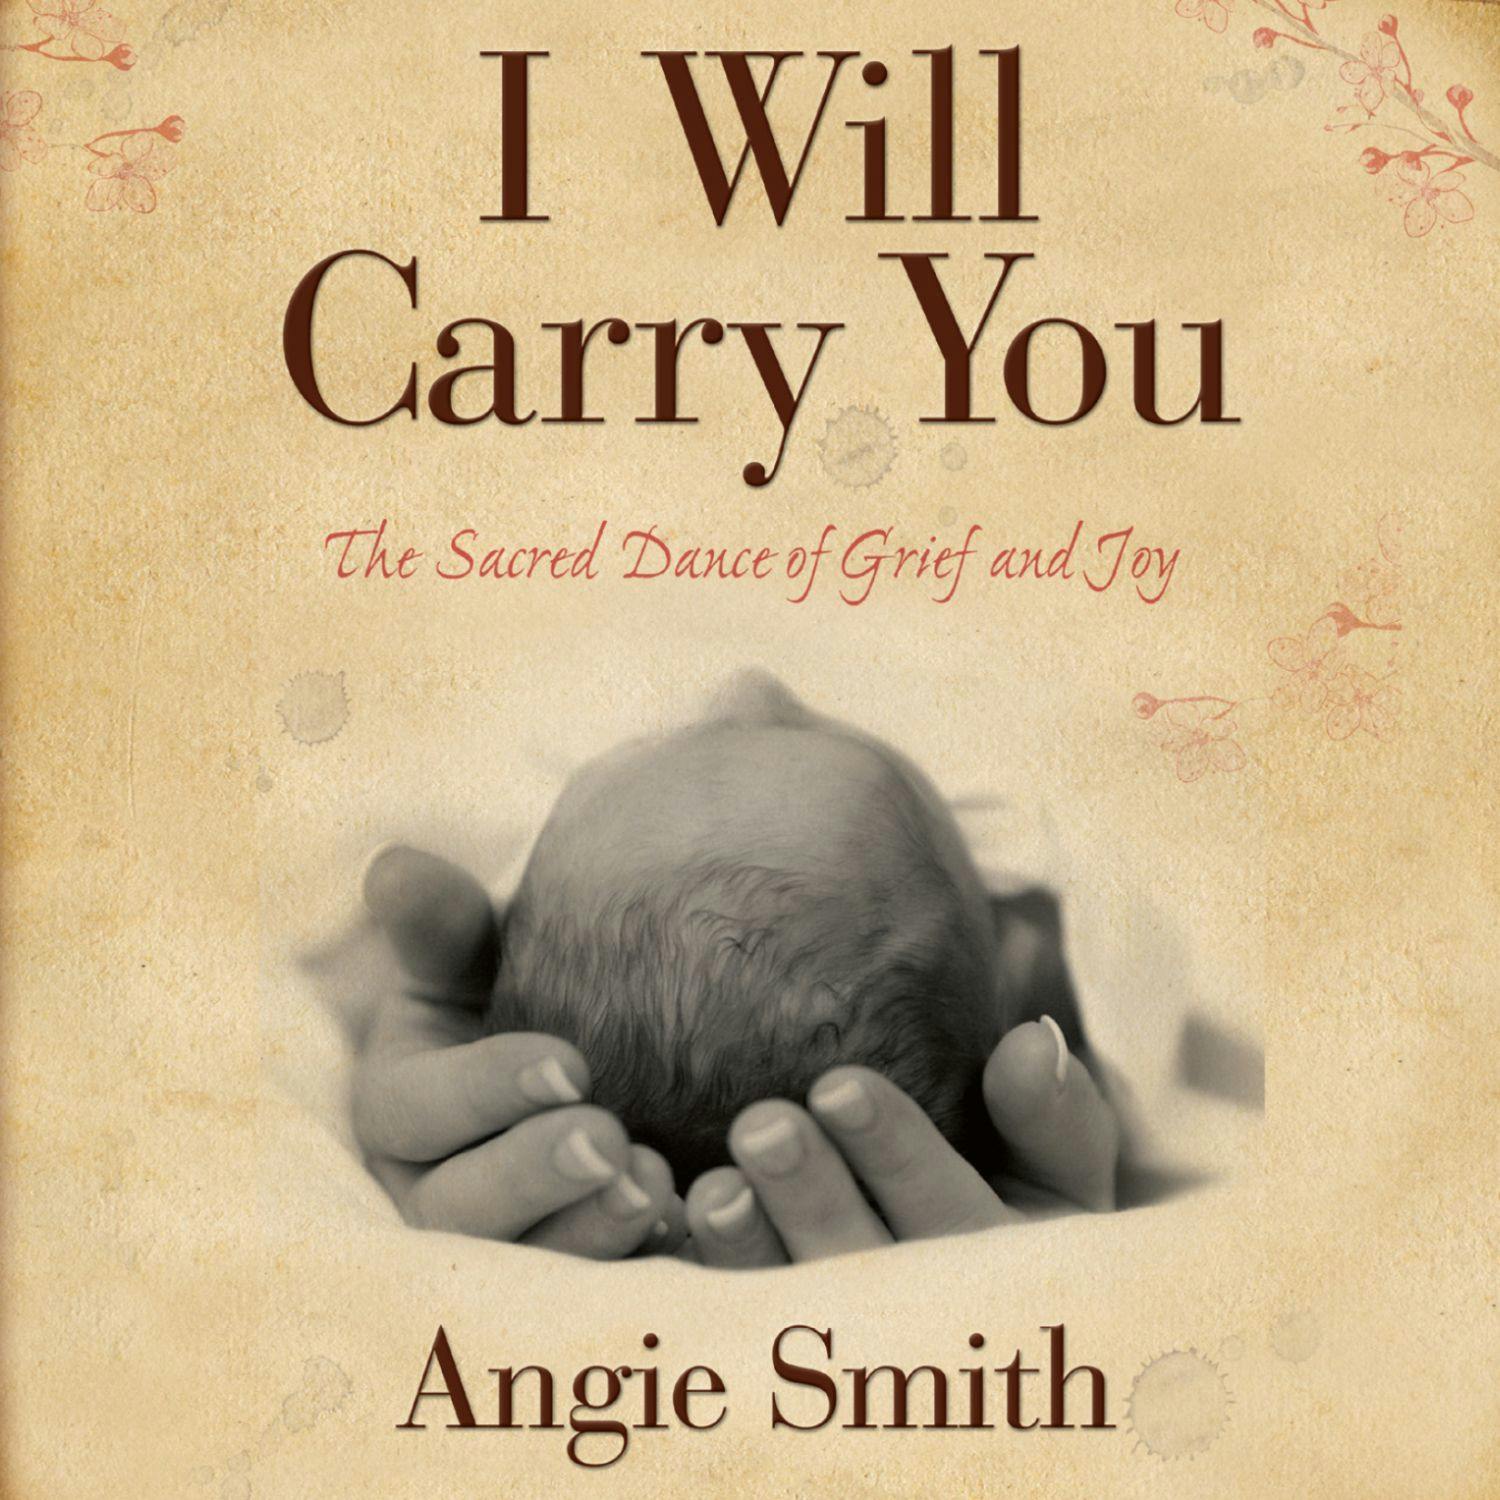 I Will Carry You: The Sacred Dance of Grief and Joy - Angie Smith